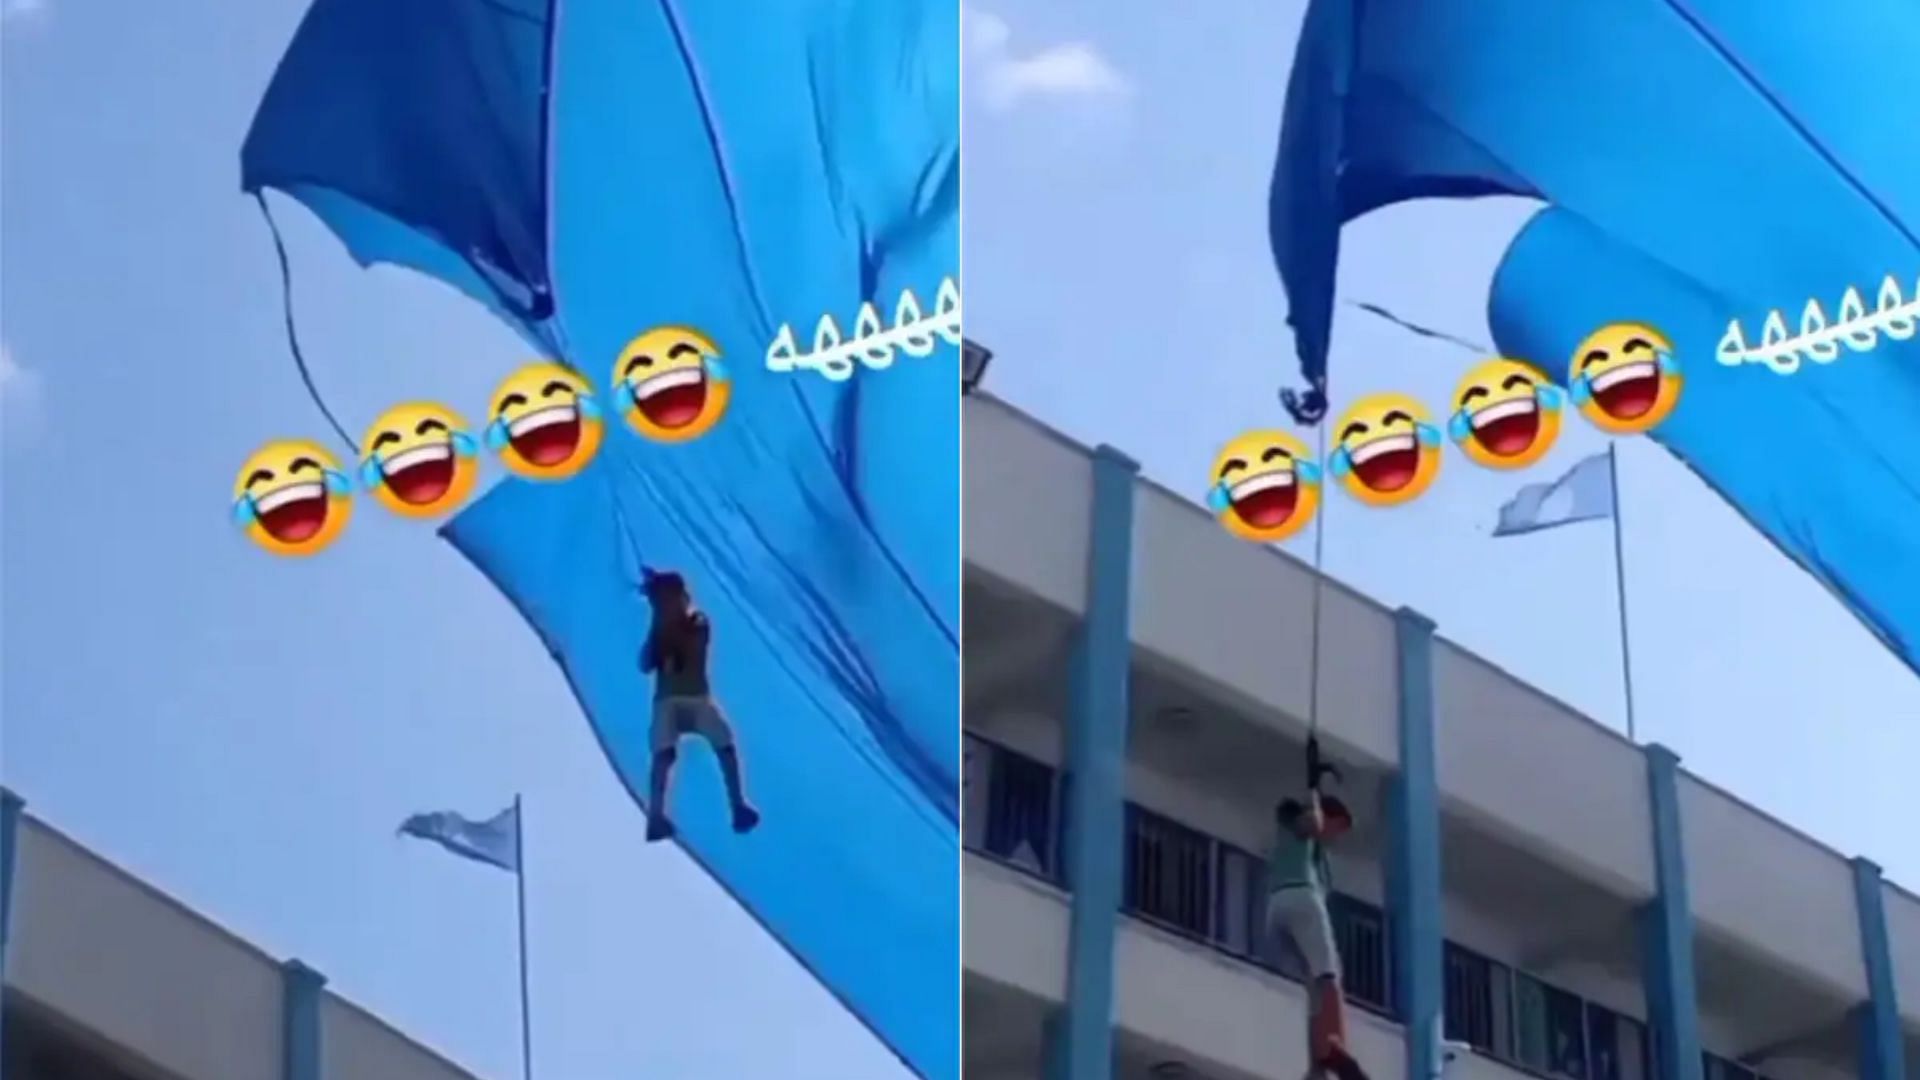 Boy holding rope flies in the air viral going video on social media